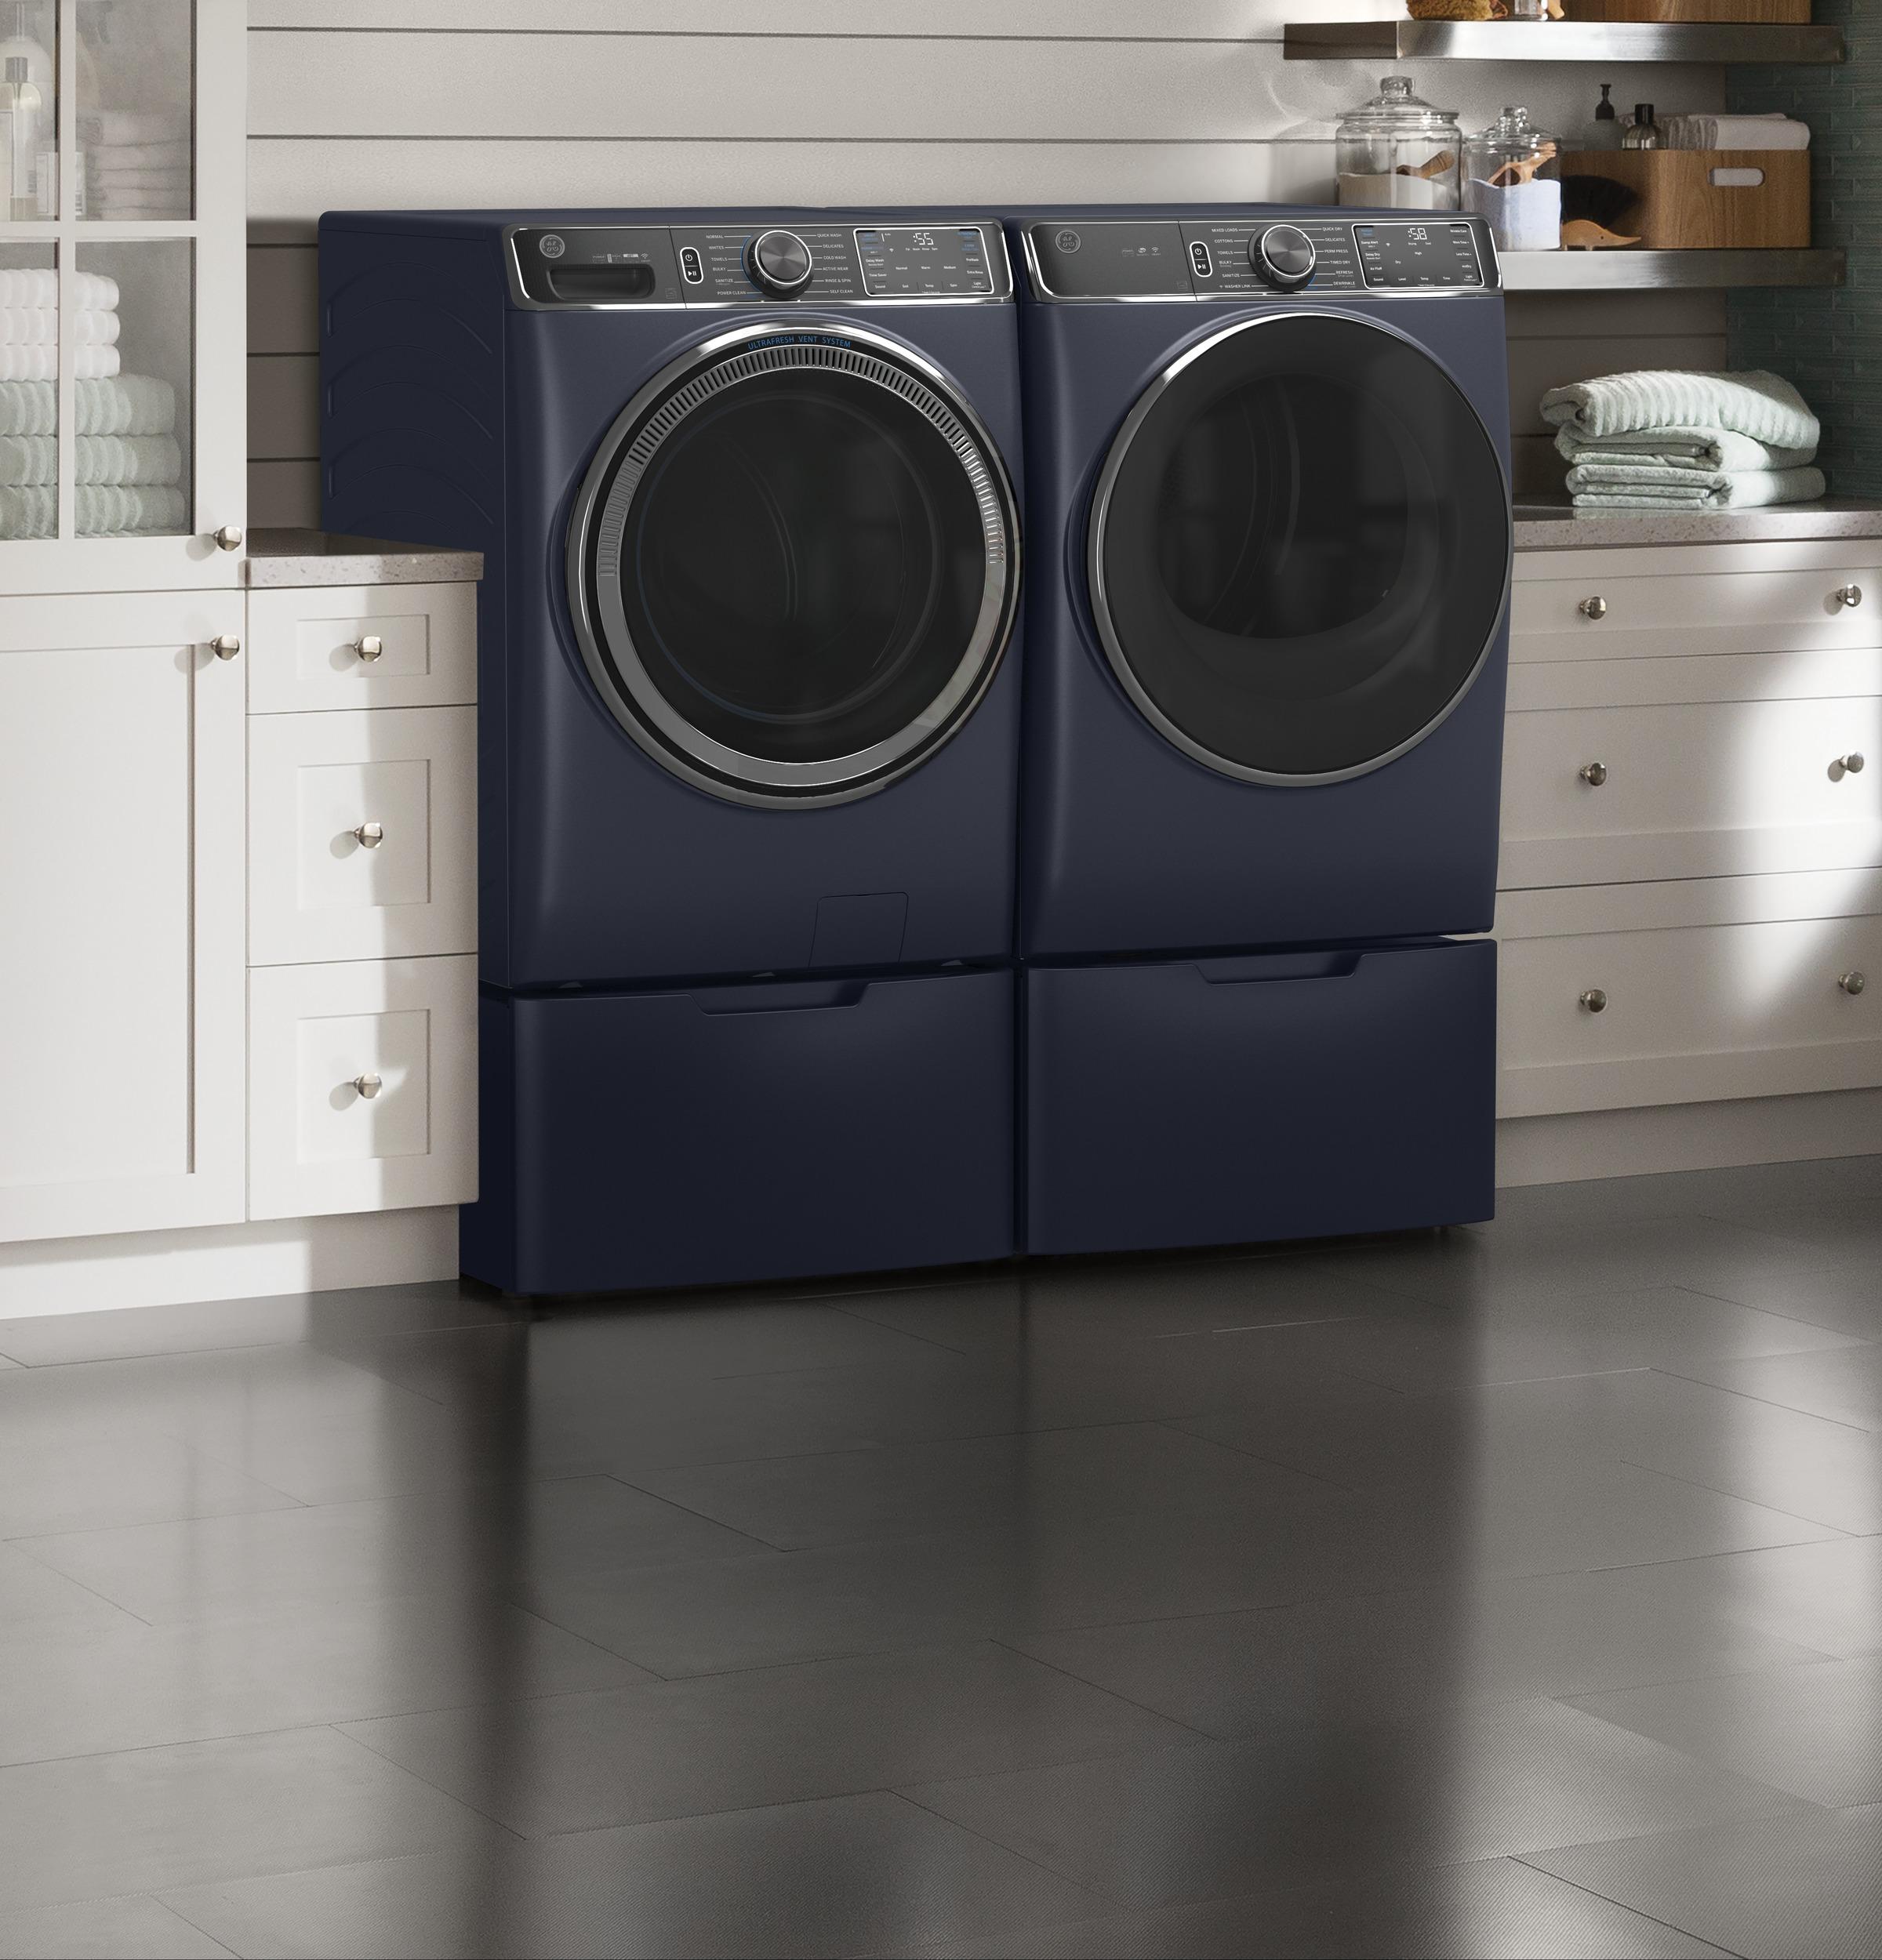 GE® ENERGY STAR® 5.0 cu. ft. Capacity Smart Front Load Steam Washer with SmartDispense™ UltraFresh Vent System with OdorBlock™ and Sanitize + Allergen